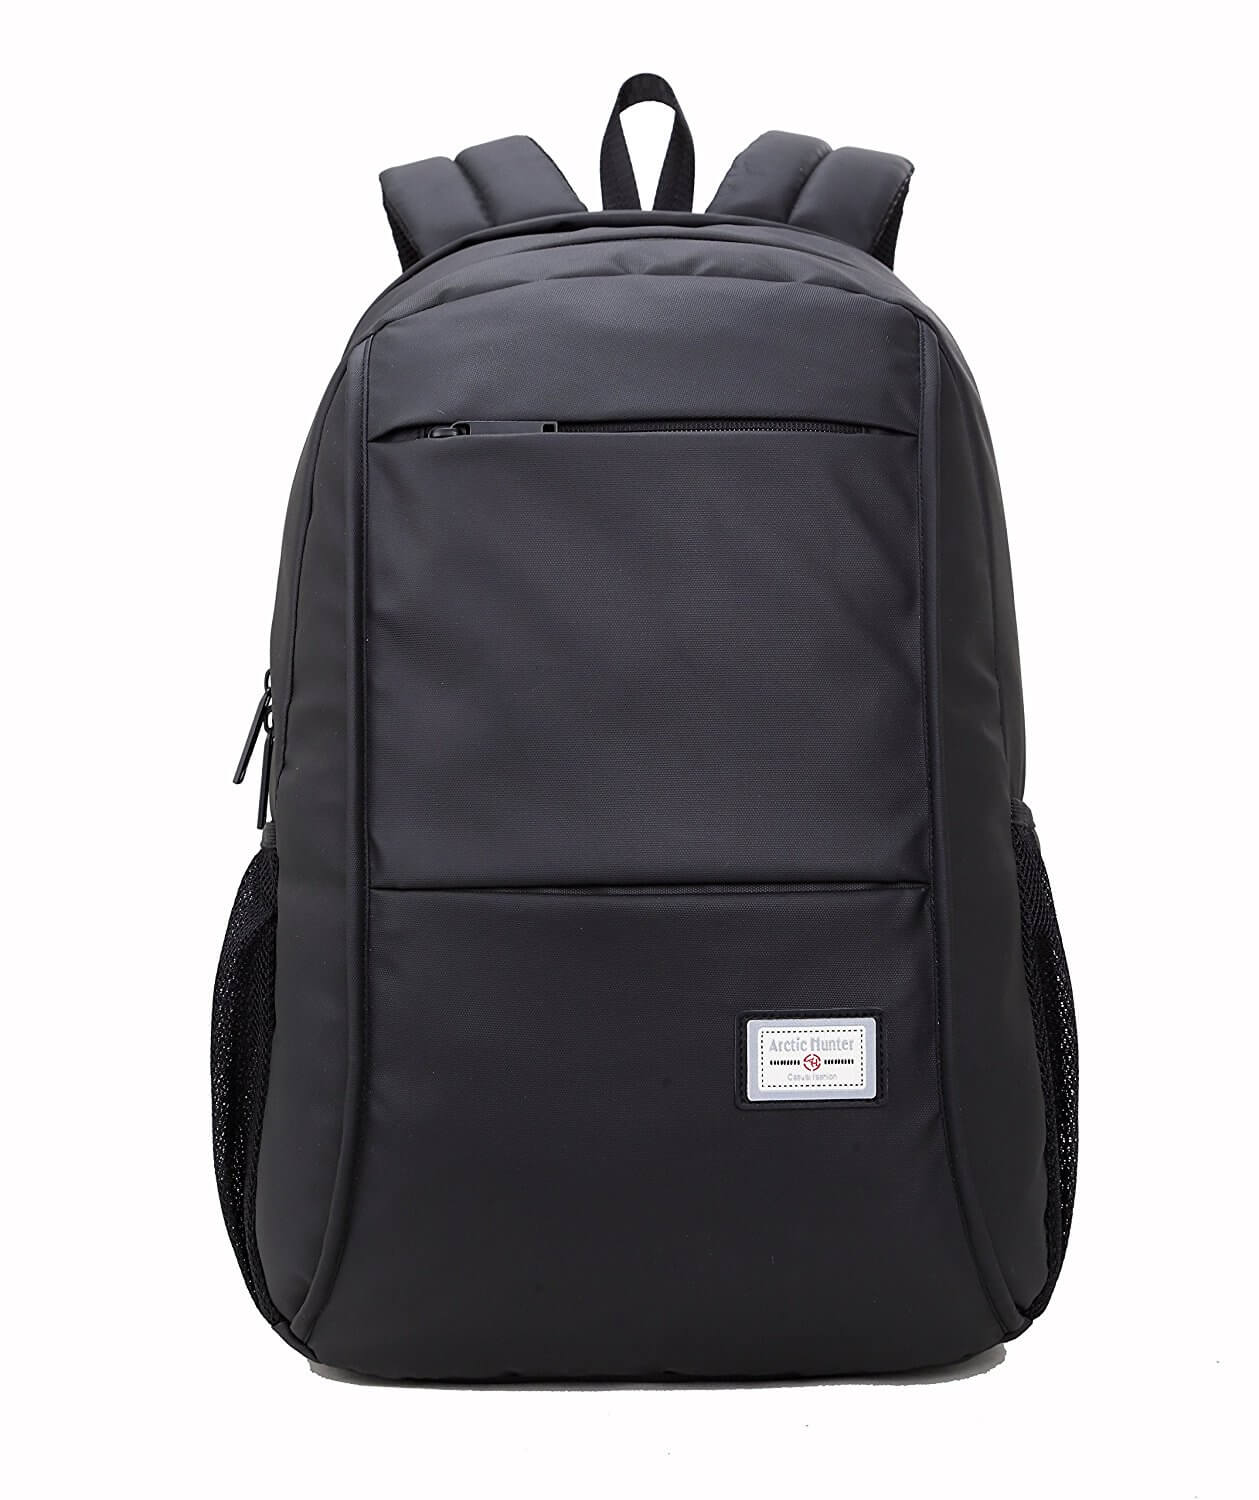 product.php?id=Arctic Hunter Water-resistant Backpack Laptop